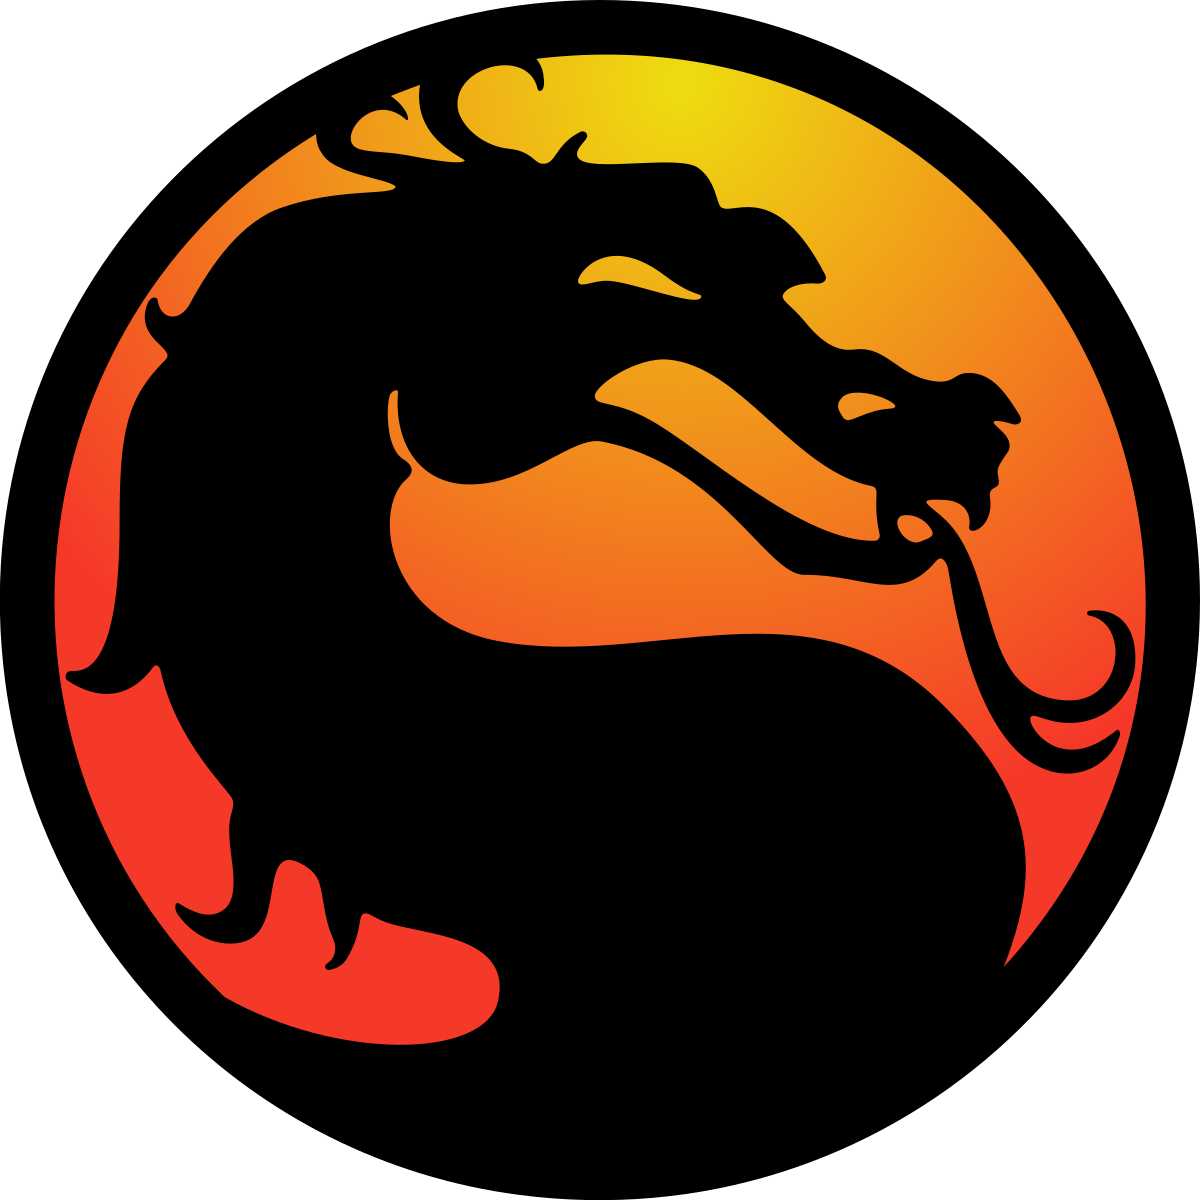 Mortal Kombat 90s: The Iconic Fighting Game Franchise